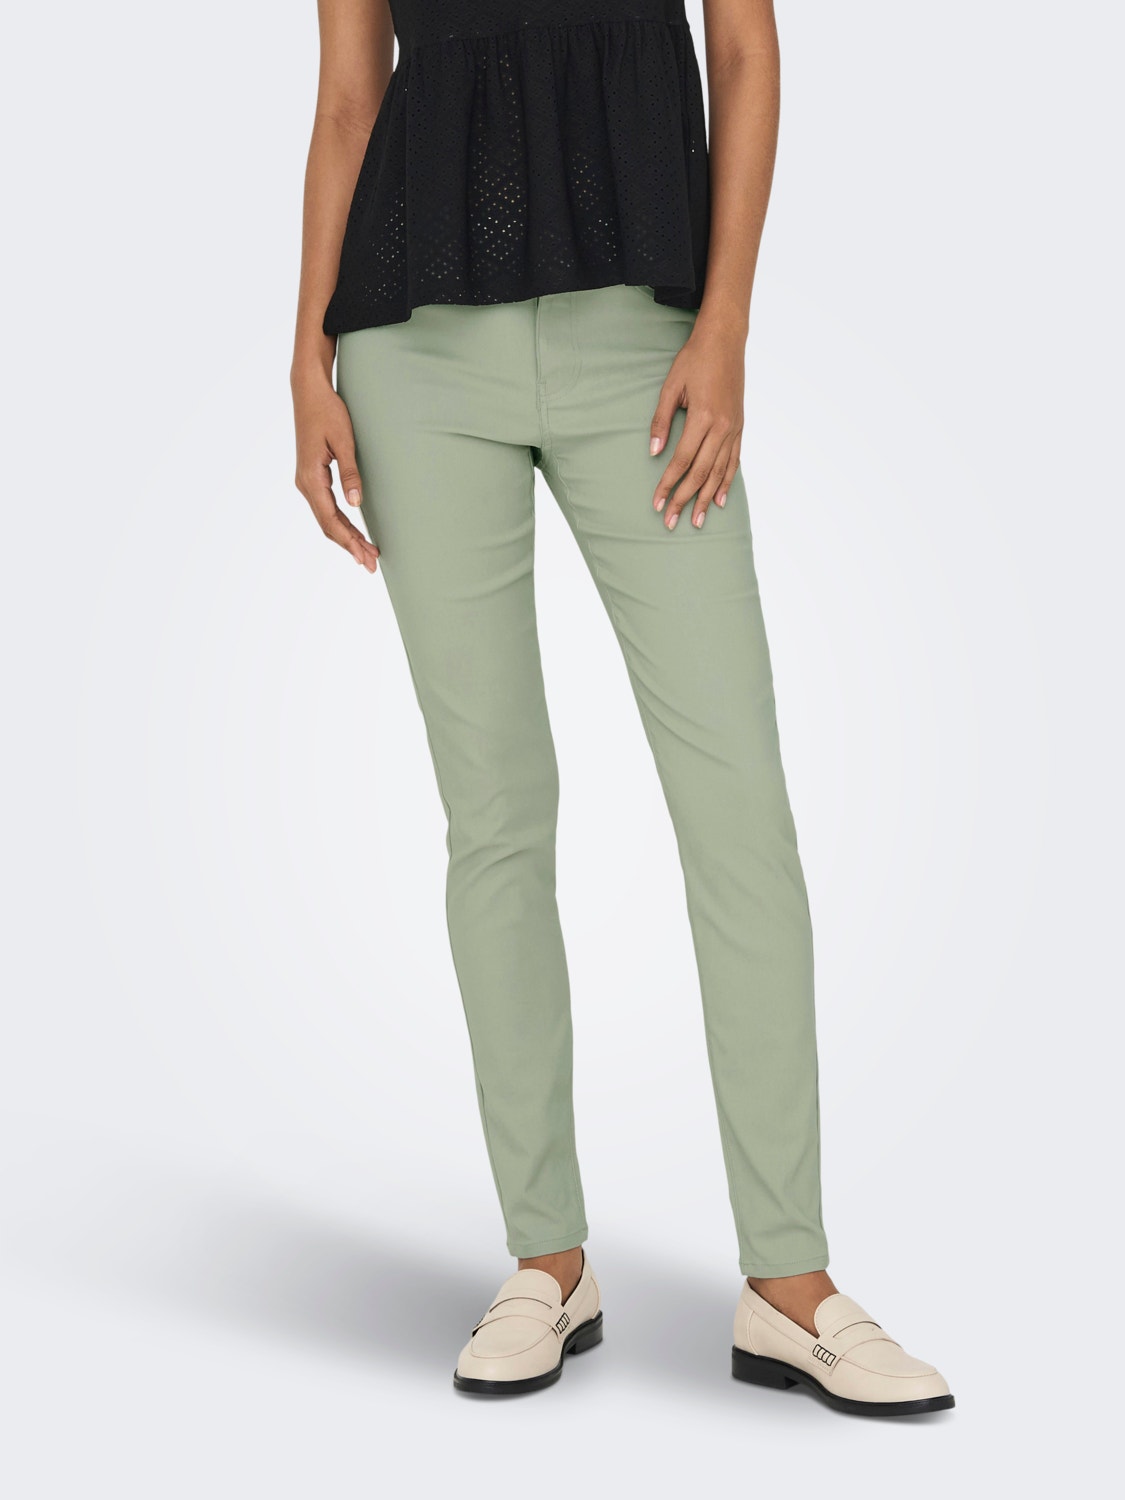 ONLY Skinny trousers with mid waist -Seagrass - 15291267